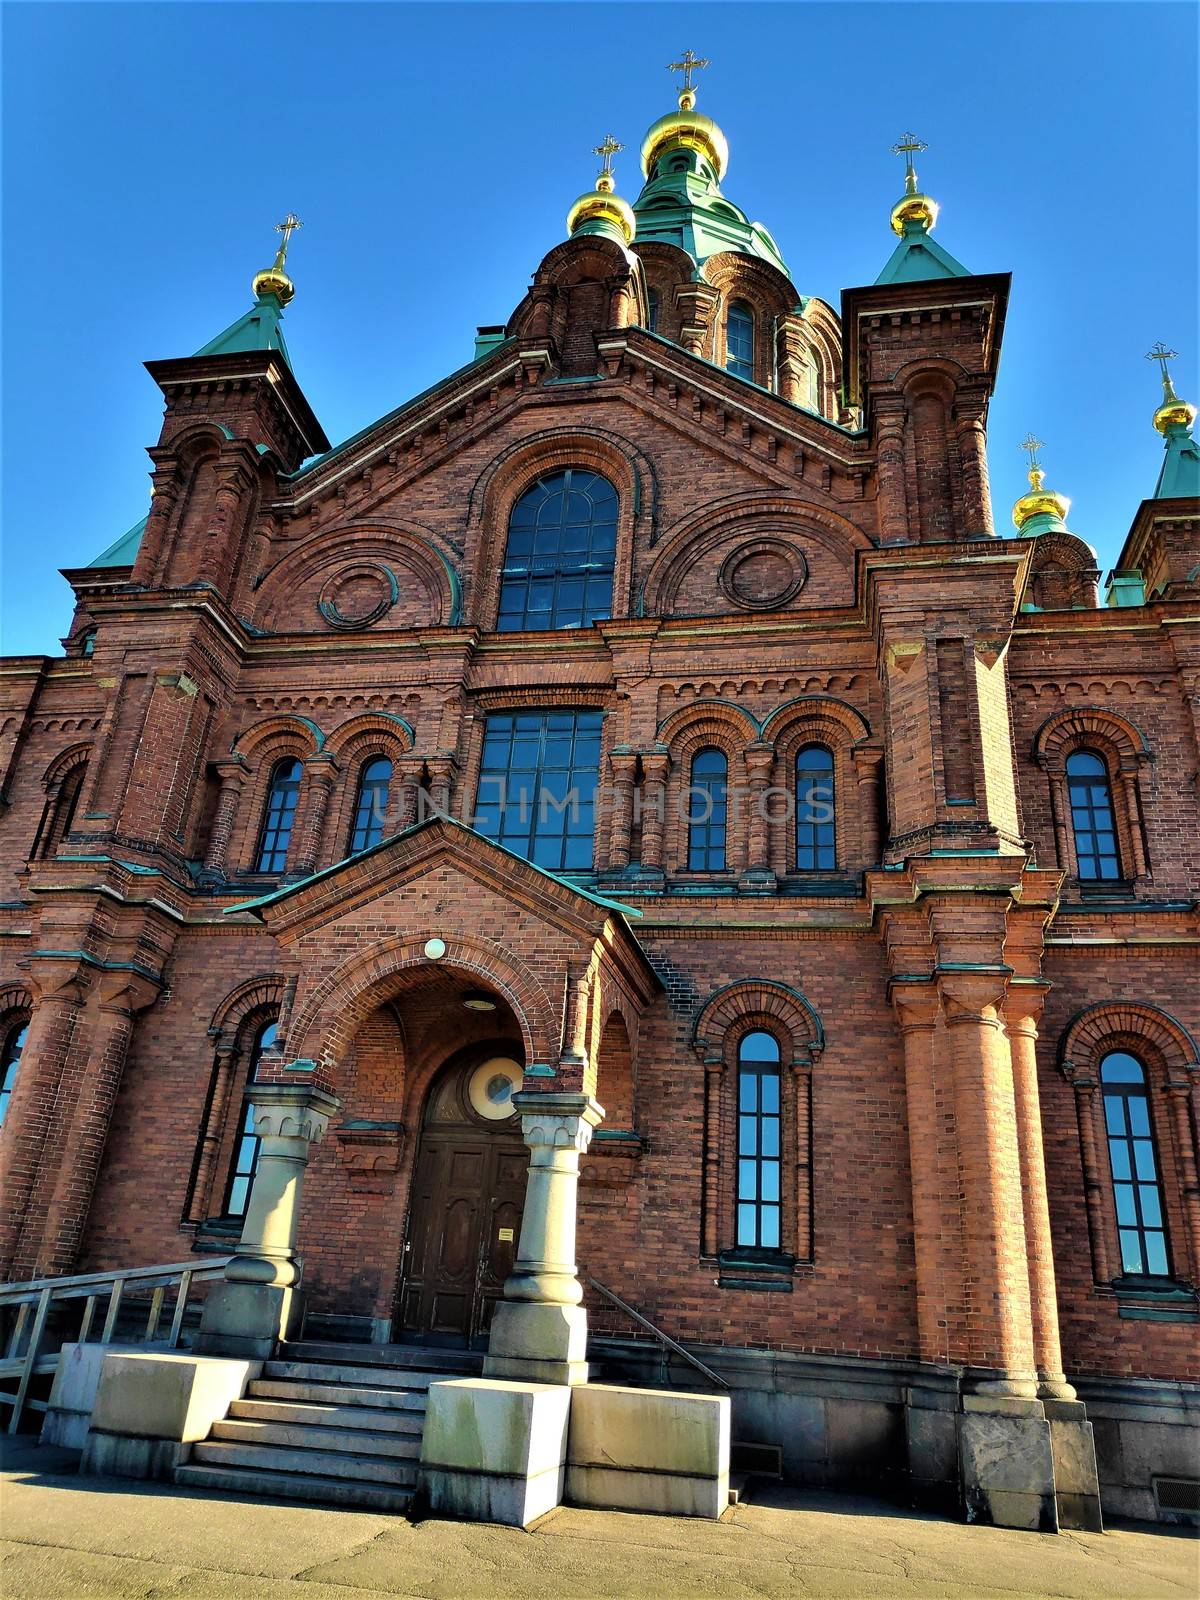 Front view of the Uspenski cathedral in Helsinki by pisces2386